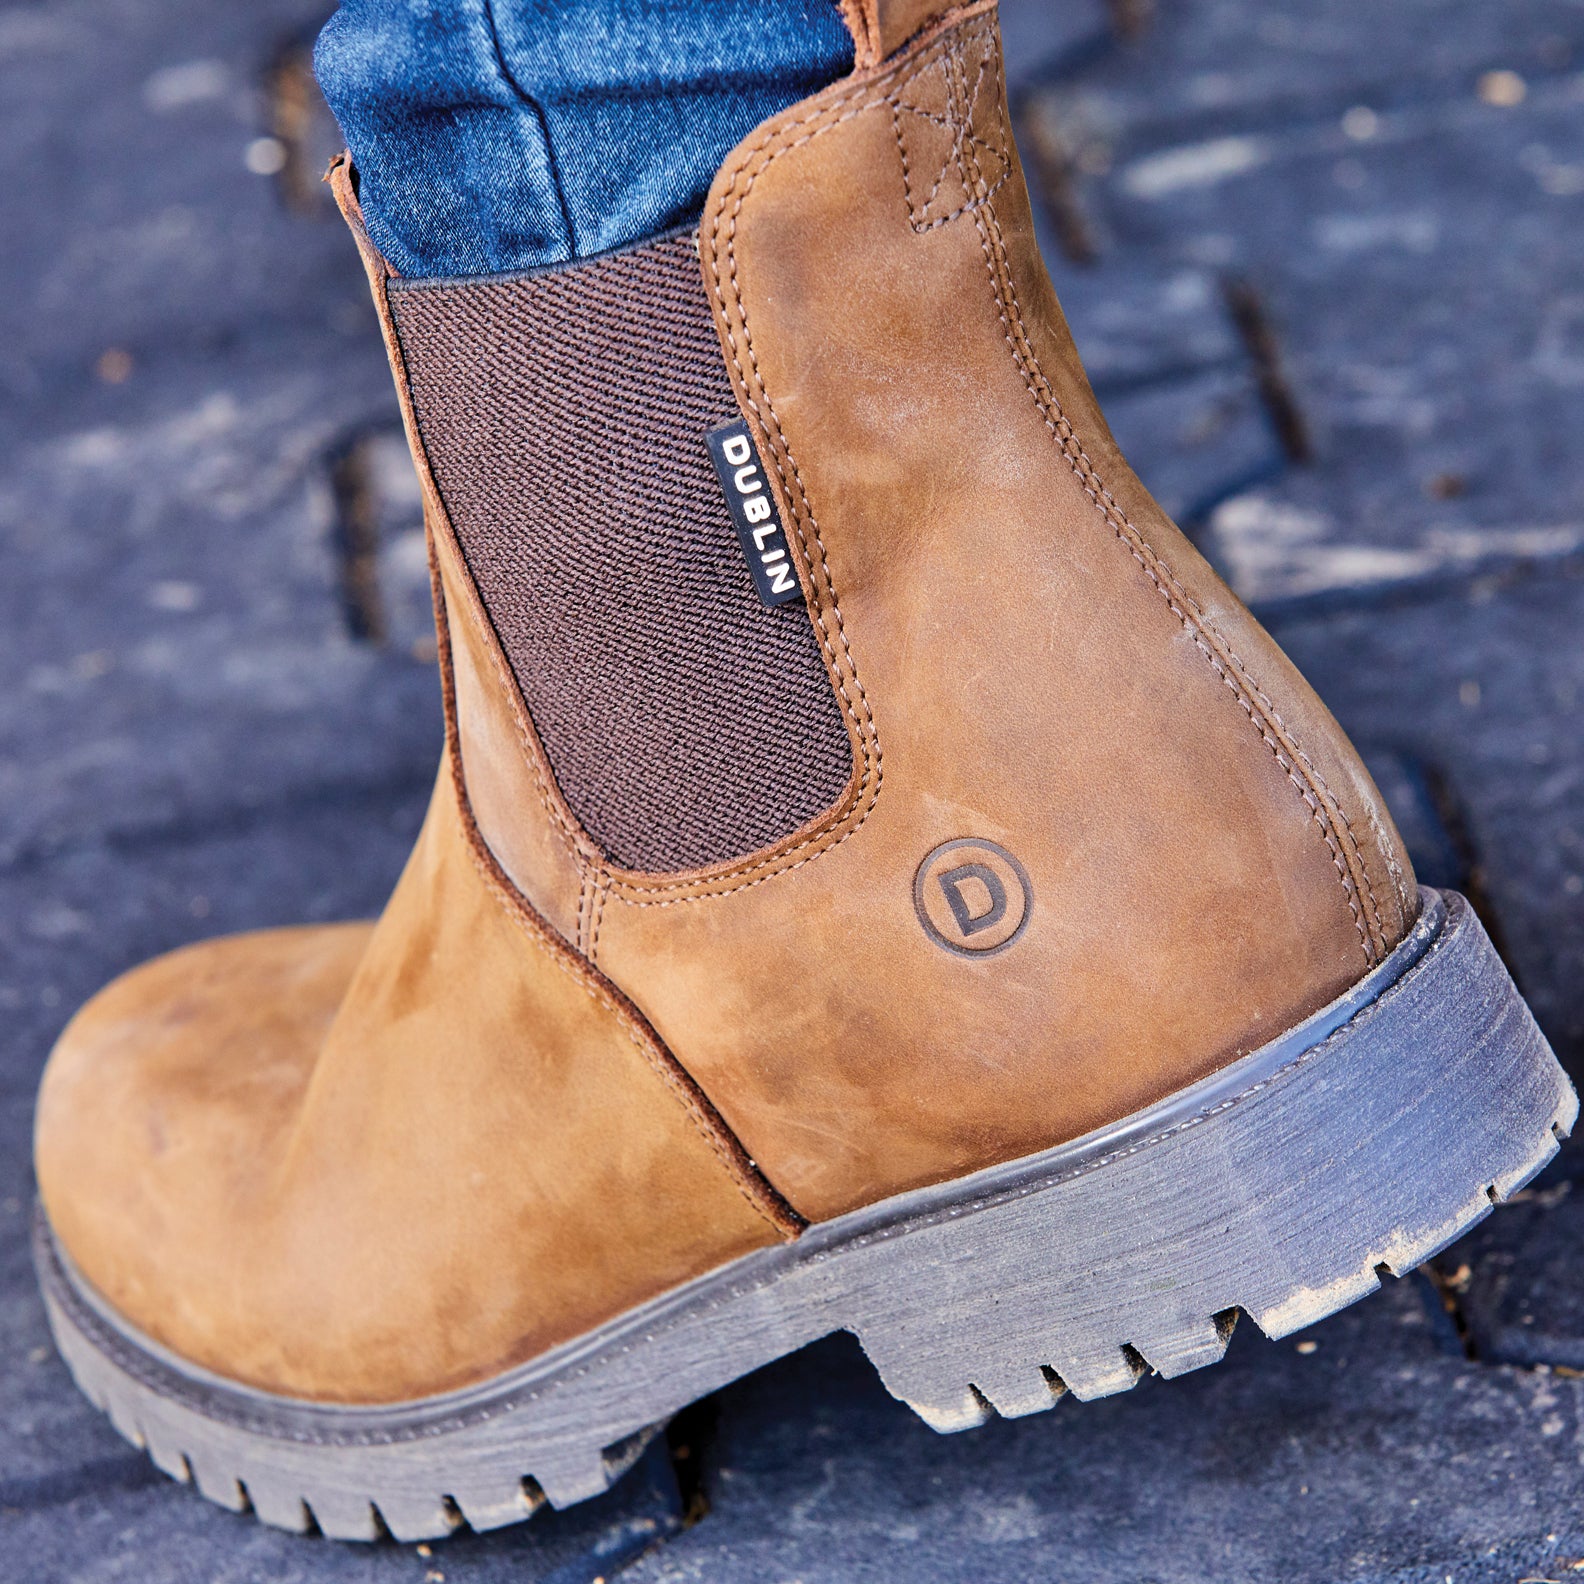 Dublin Boots | New Forest Clothing